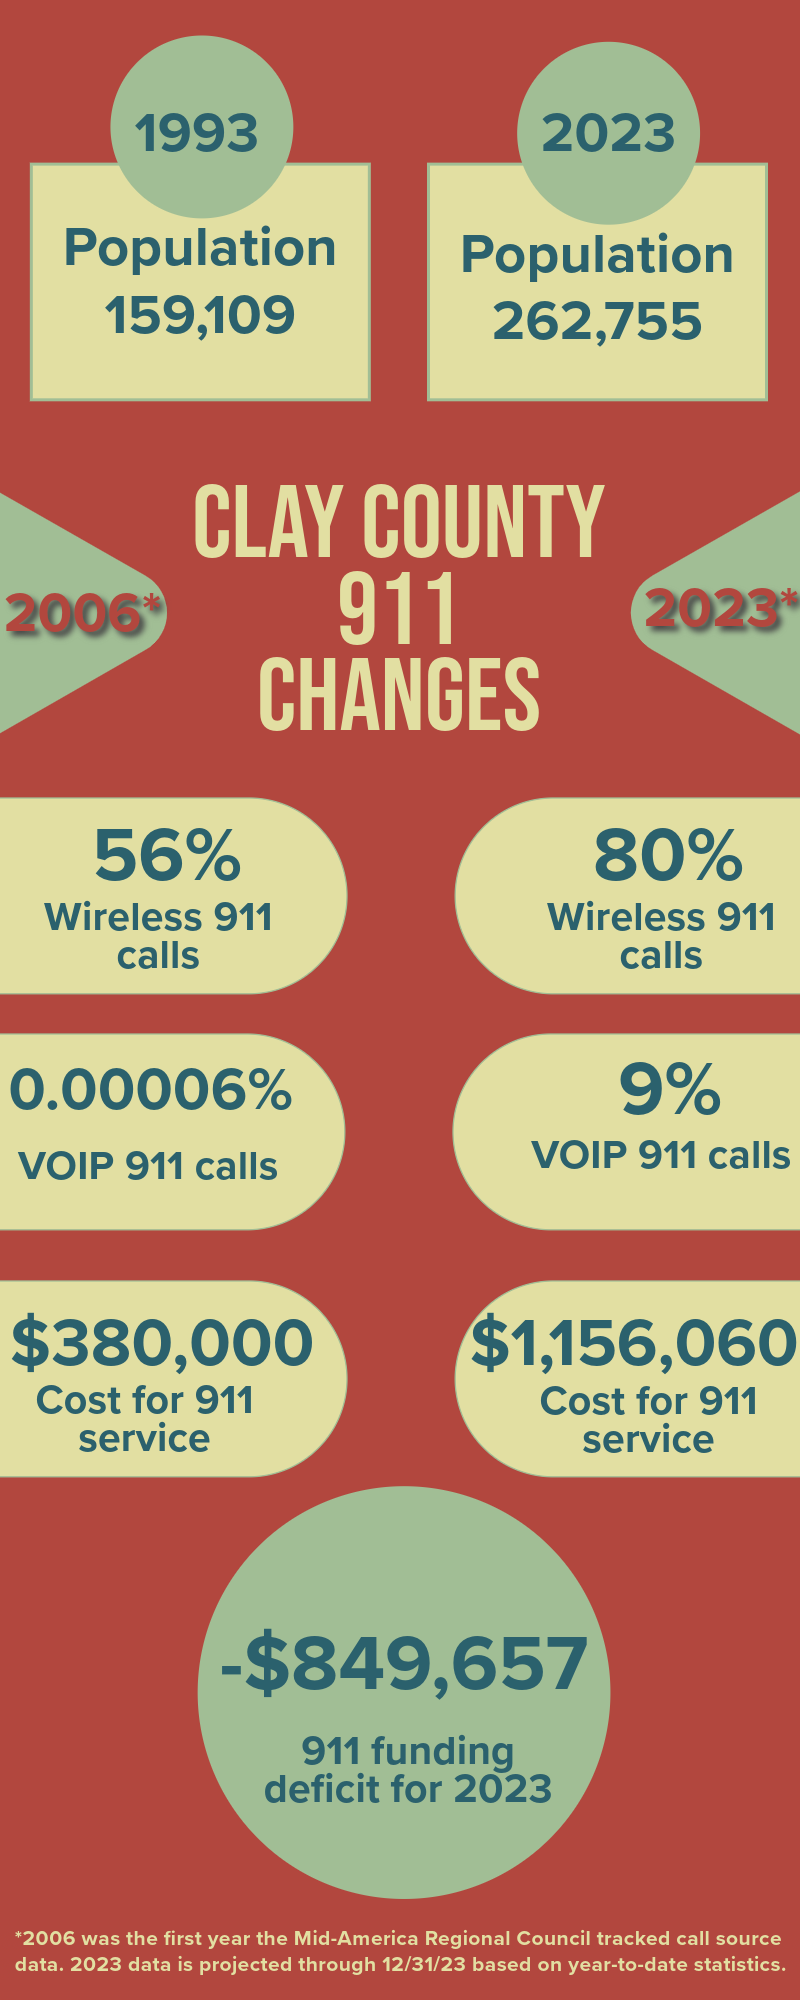 Voters to decide on fee for funding 911